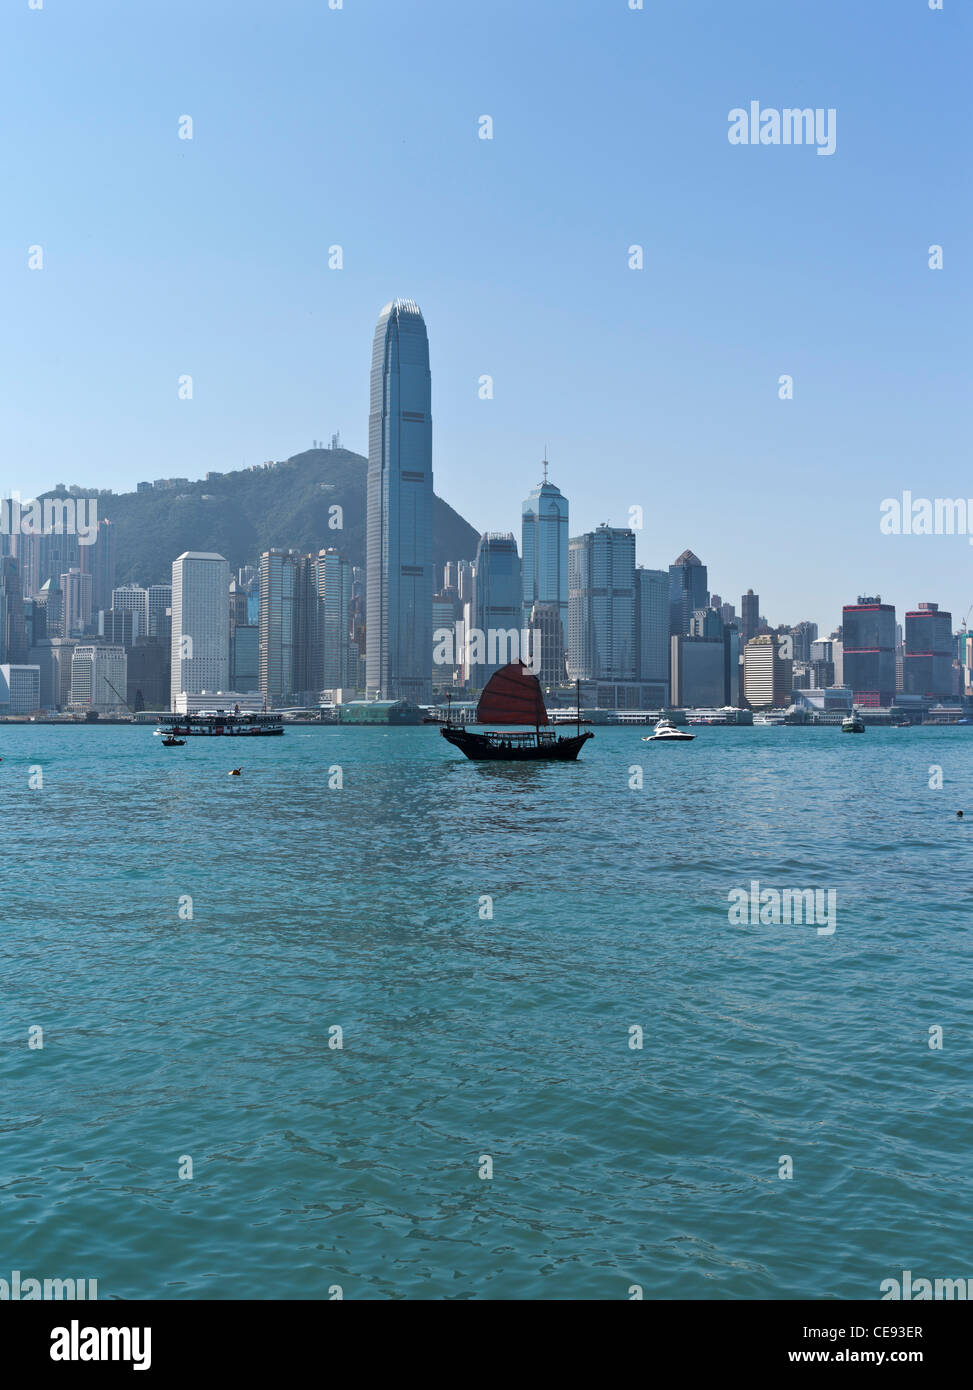 dh Hong Kong Harbour CENTRAL HONG KONG Red sail junk harbour Central Buildings IFC2 y Victoria Peak Harbour Harbour Harbour Daytime Skyline barco chino paisaje urbano Foto de stock